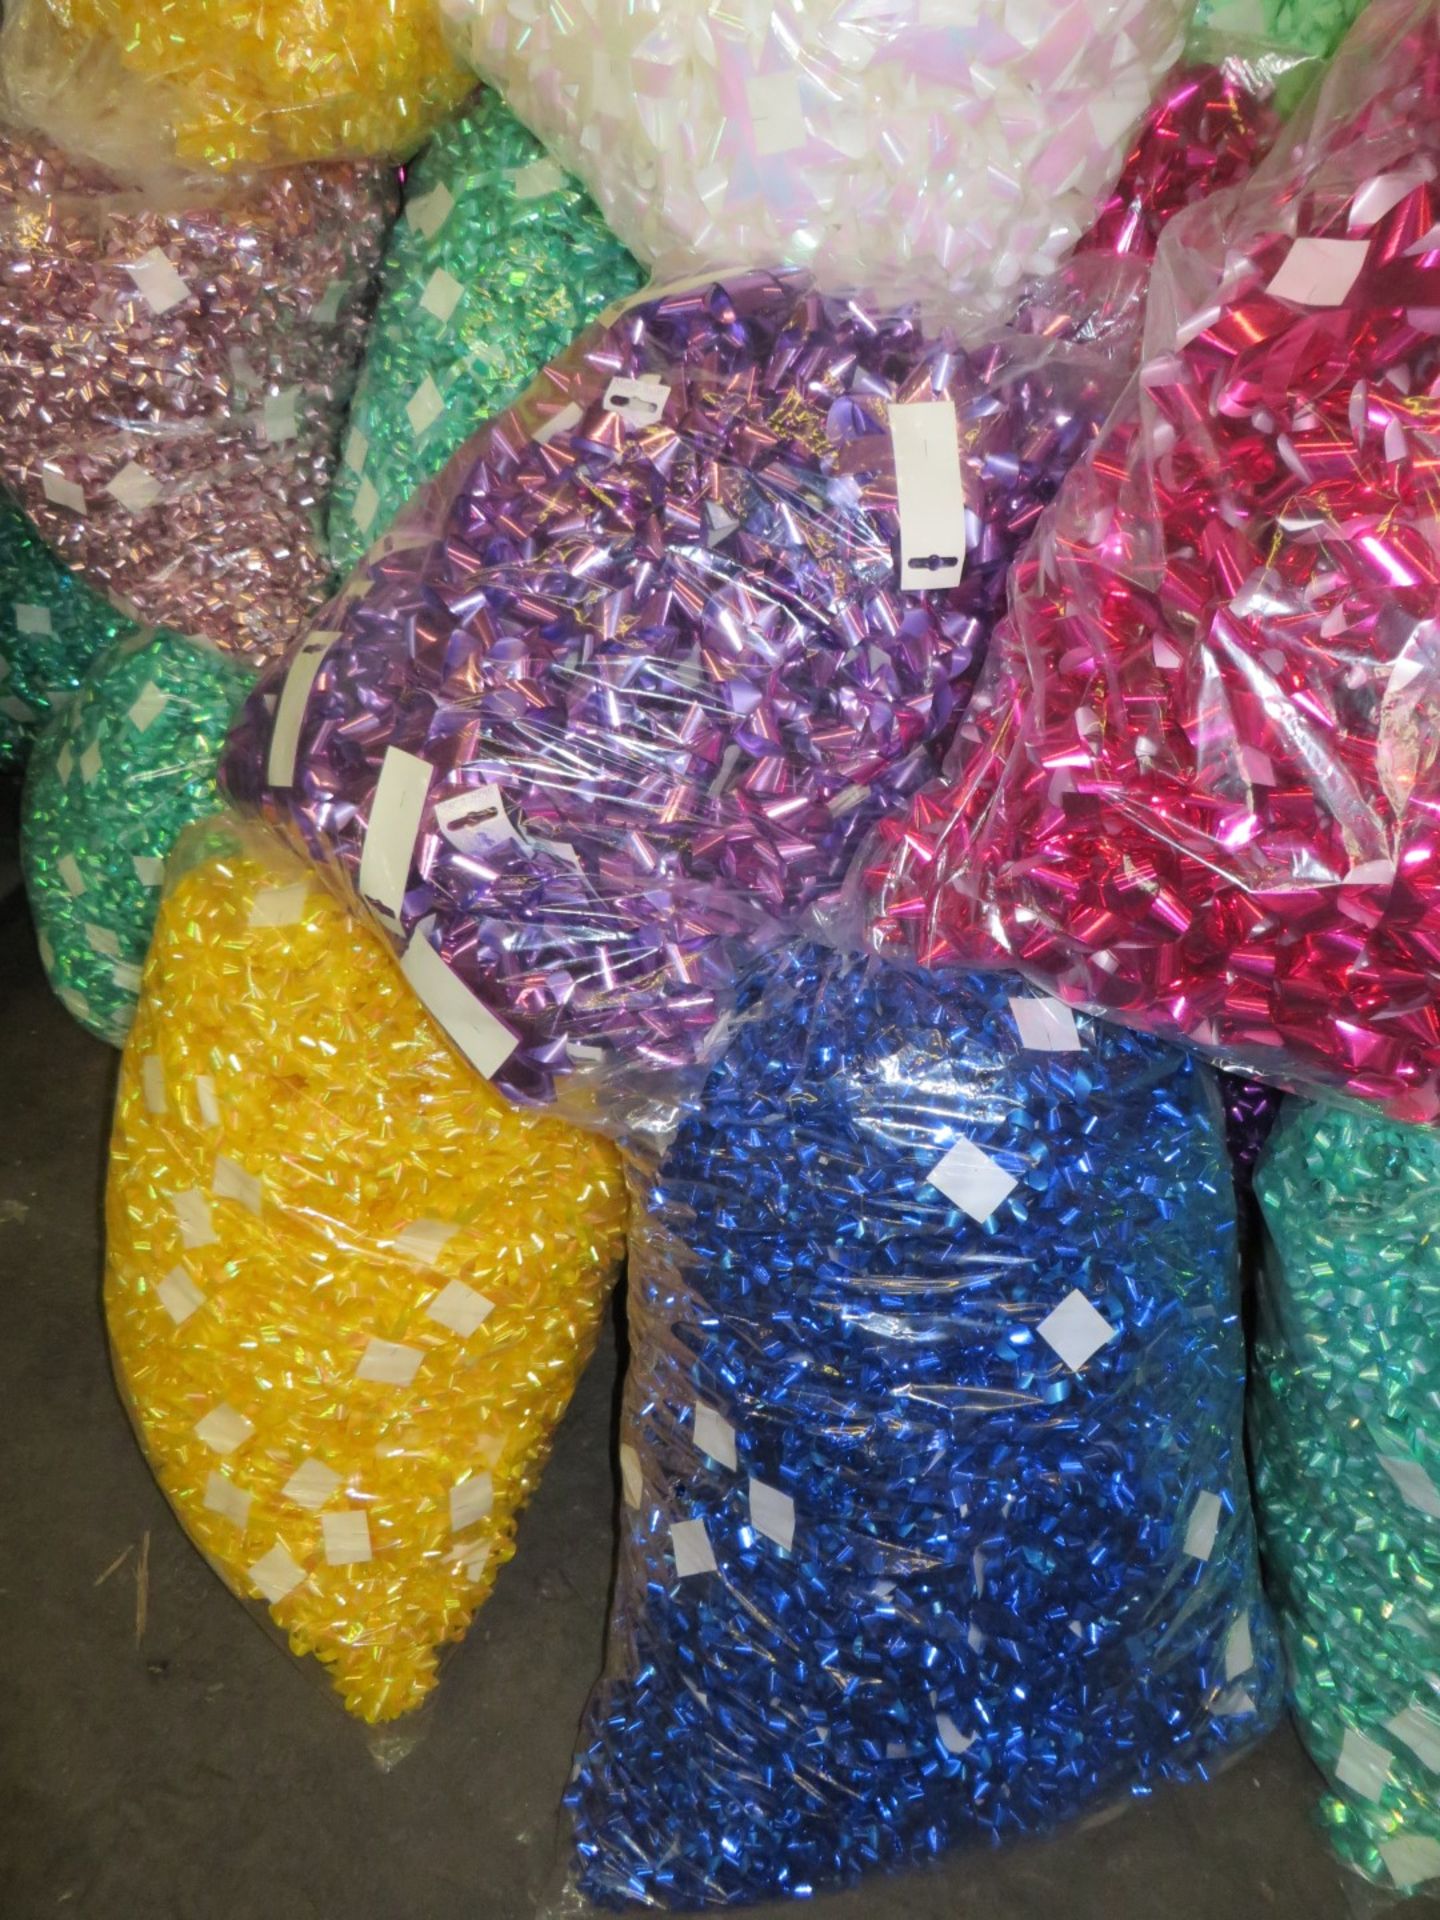 5 x Random Colour Large Bags of New Self-Adhesive Present Bows - CL185 - Ref: DSYBOWS - Location: St - Image 3 of 6